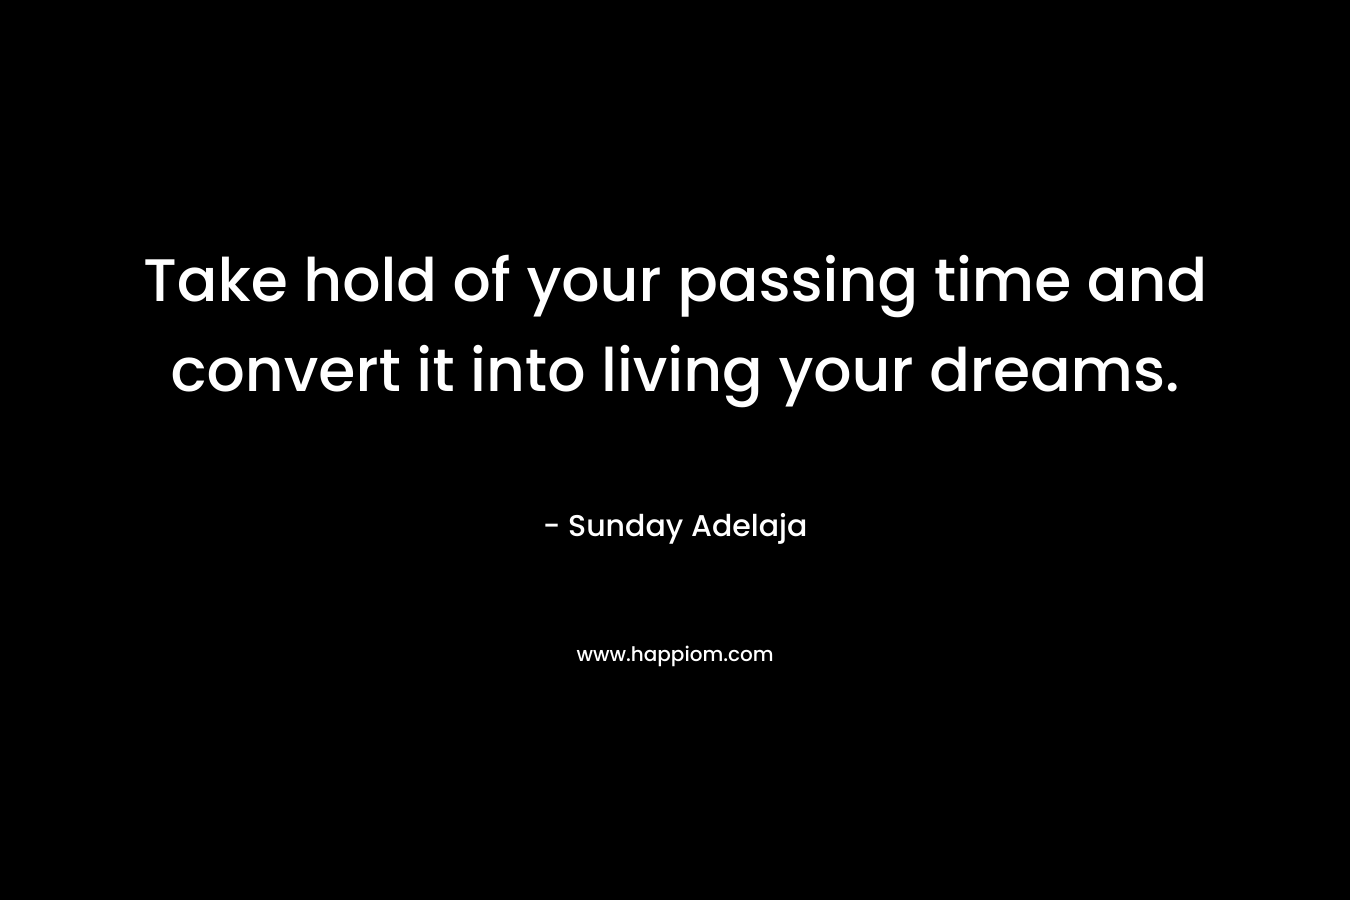 Take hold of your passing time and convert it into living your dreams.